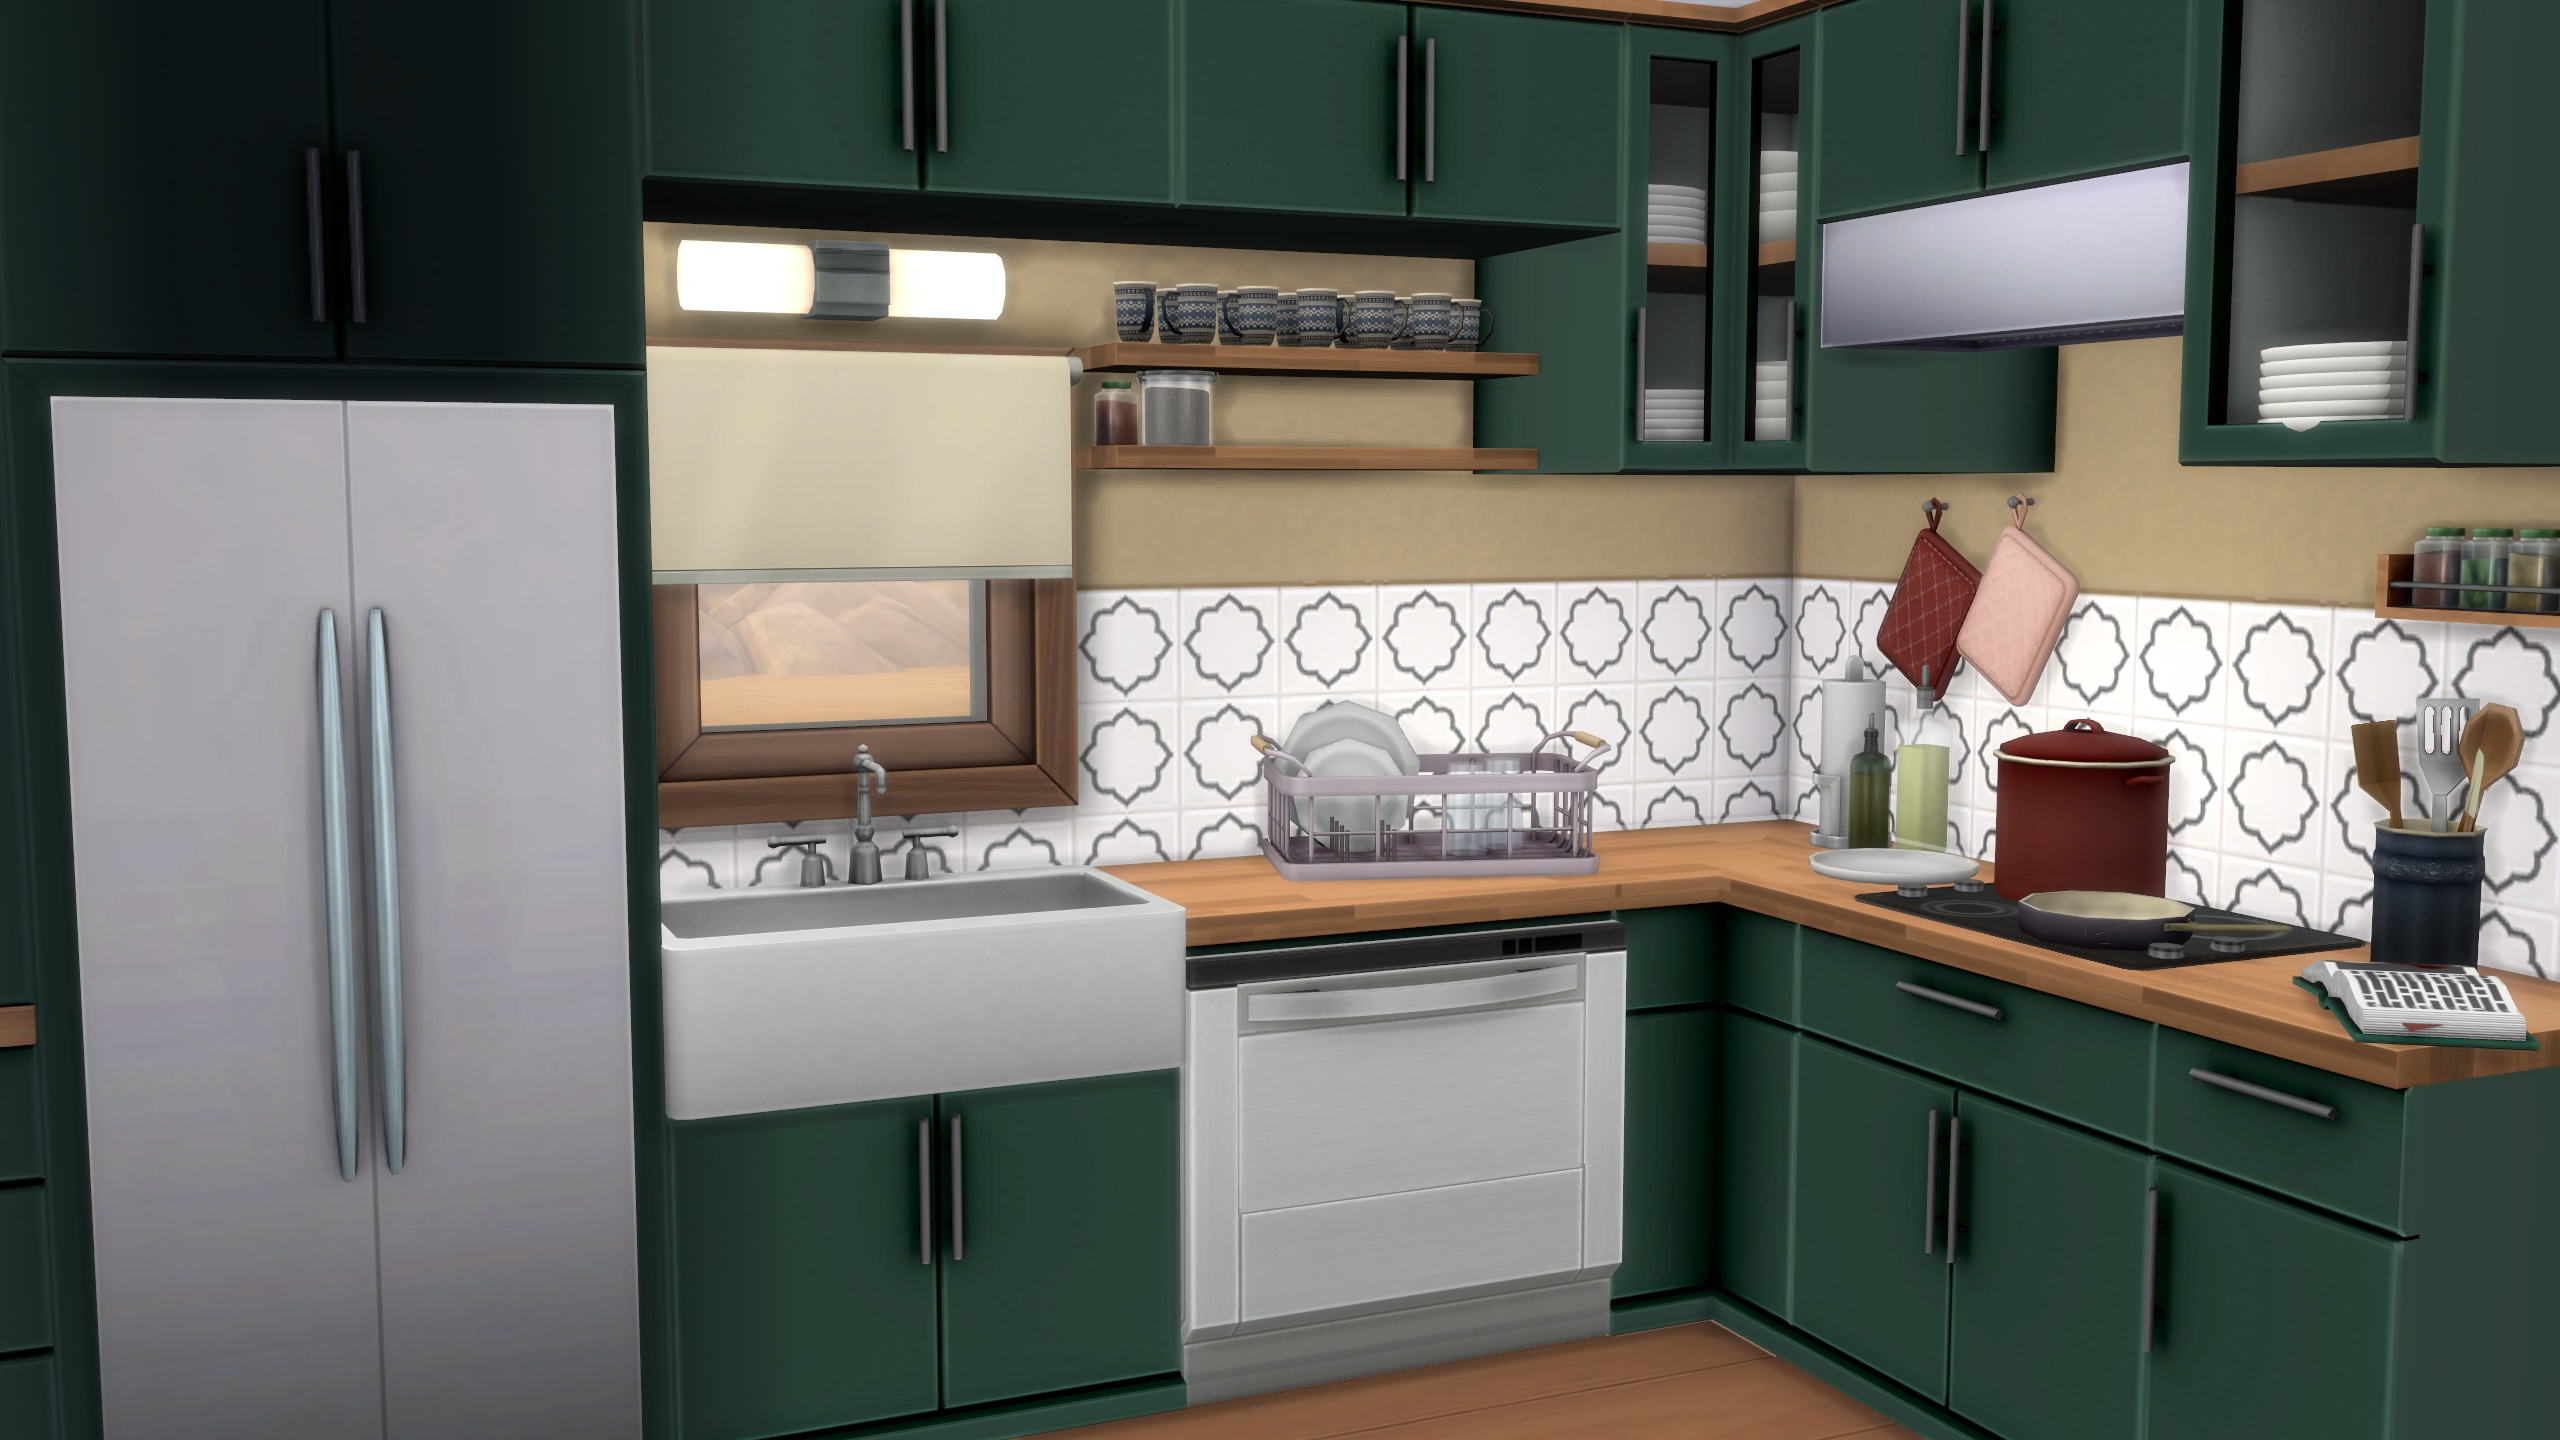 Sims 4 CC - A kitchen with custom butcher counters and green cabinets, and custom clutter.